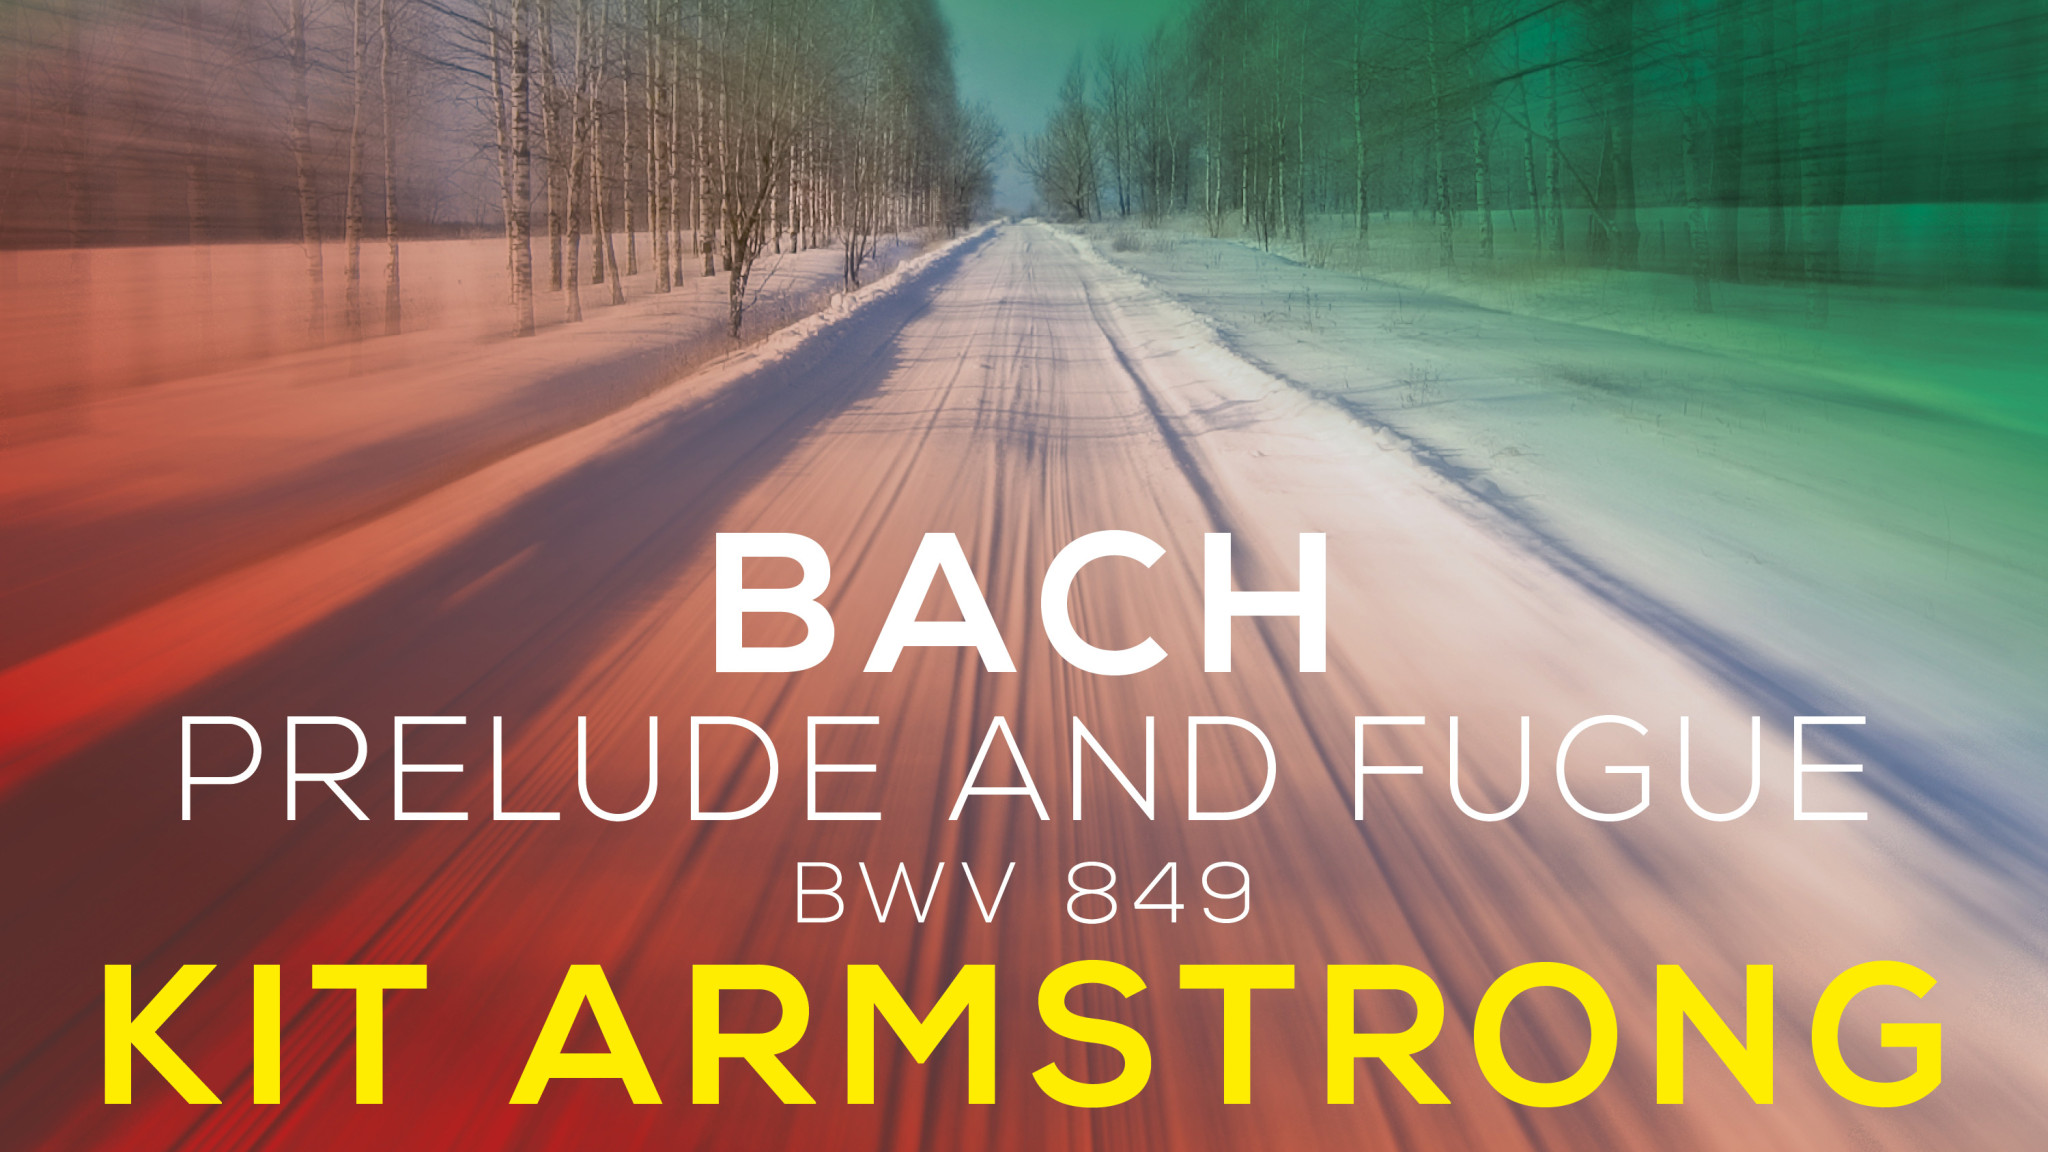 Musical Moments - Bach: Prelude and Fugue BWV 849 - Kit Armstrong